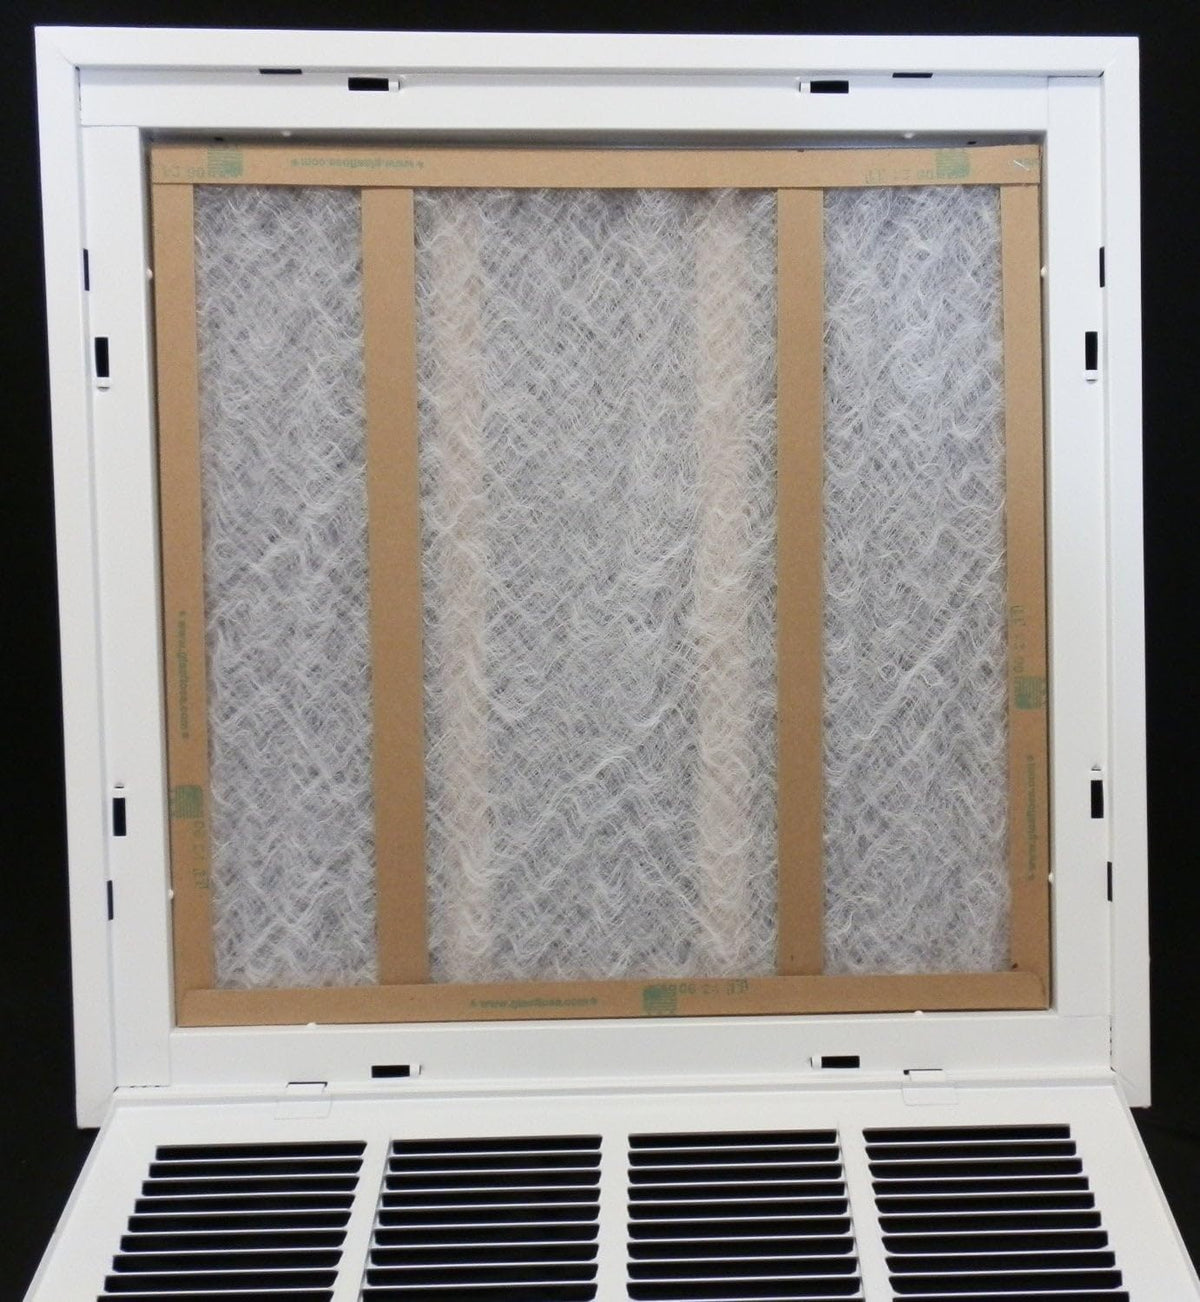 12&quot; X 14&quot; Steel Return Air Filter Grille for 1&quot; Filter - Removable Frame - [Outer Dimensions: 14 5/8&quot; X 16 5/8&quot;]